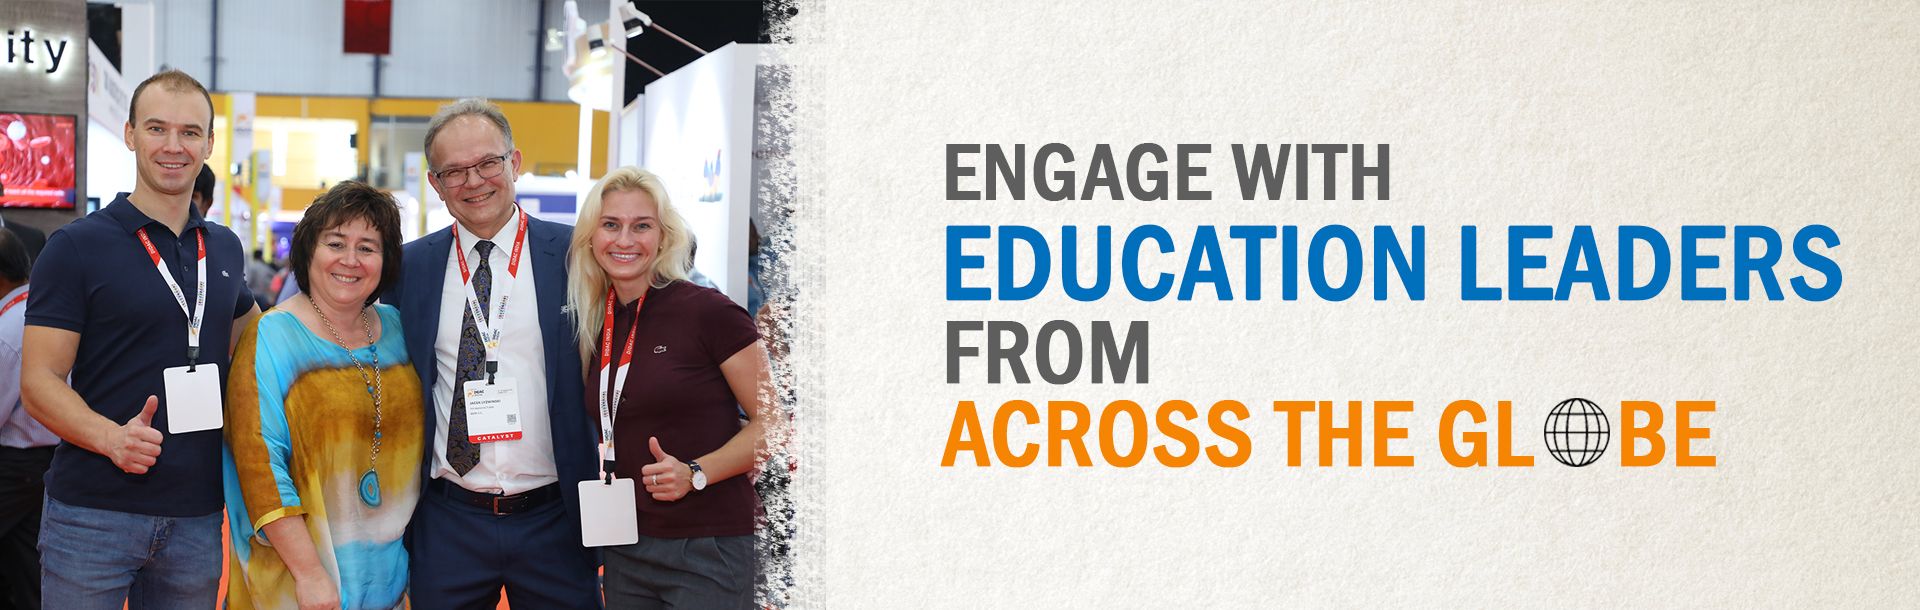 Engage With Education Leaders From Across The Globe